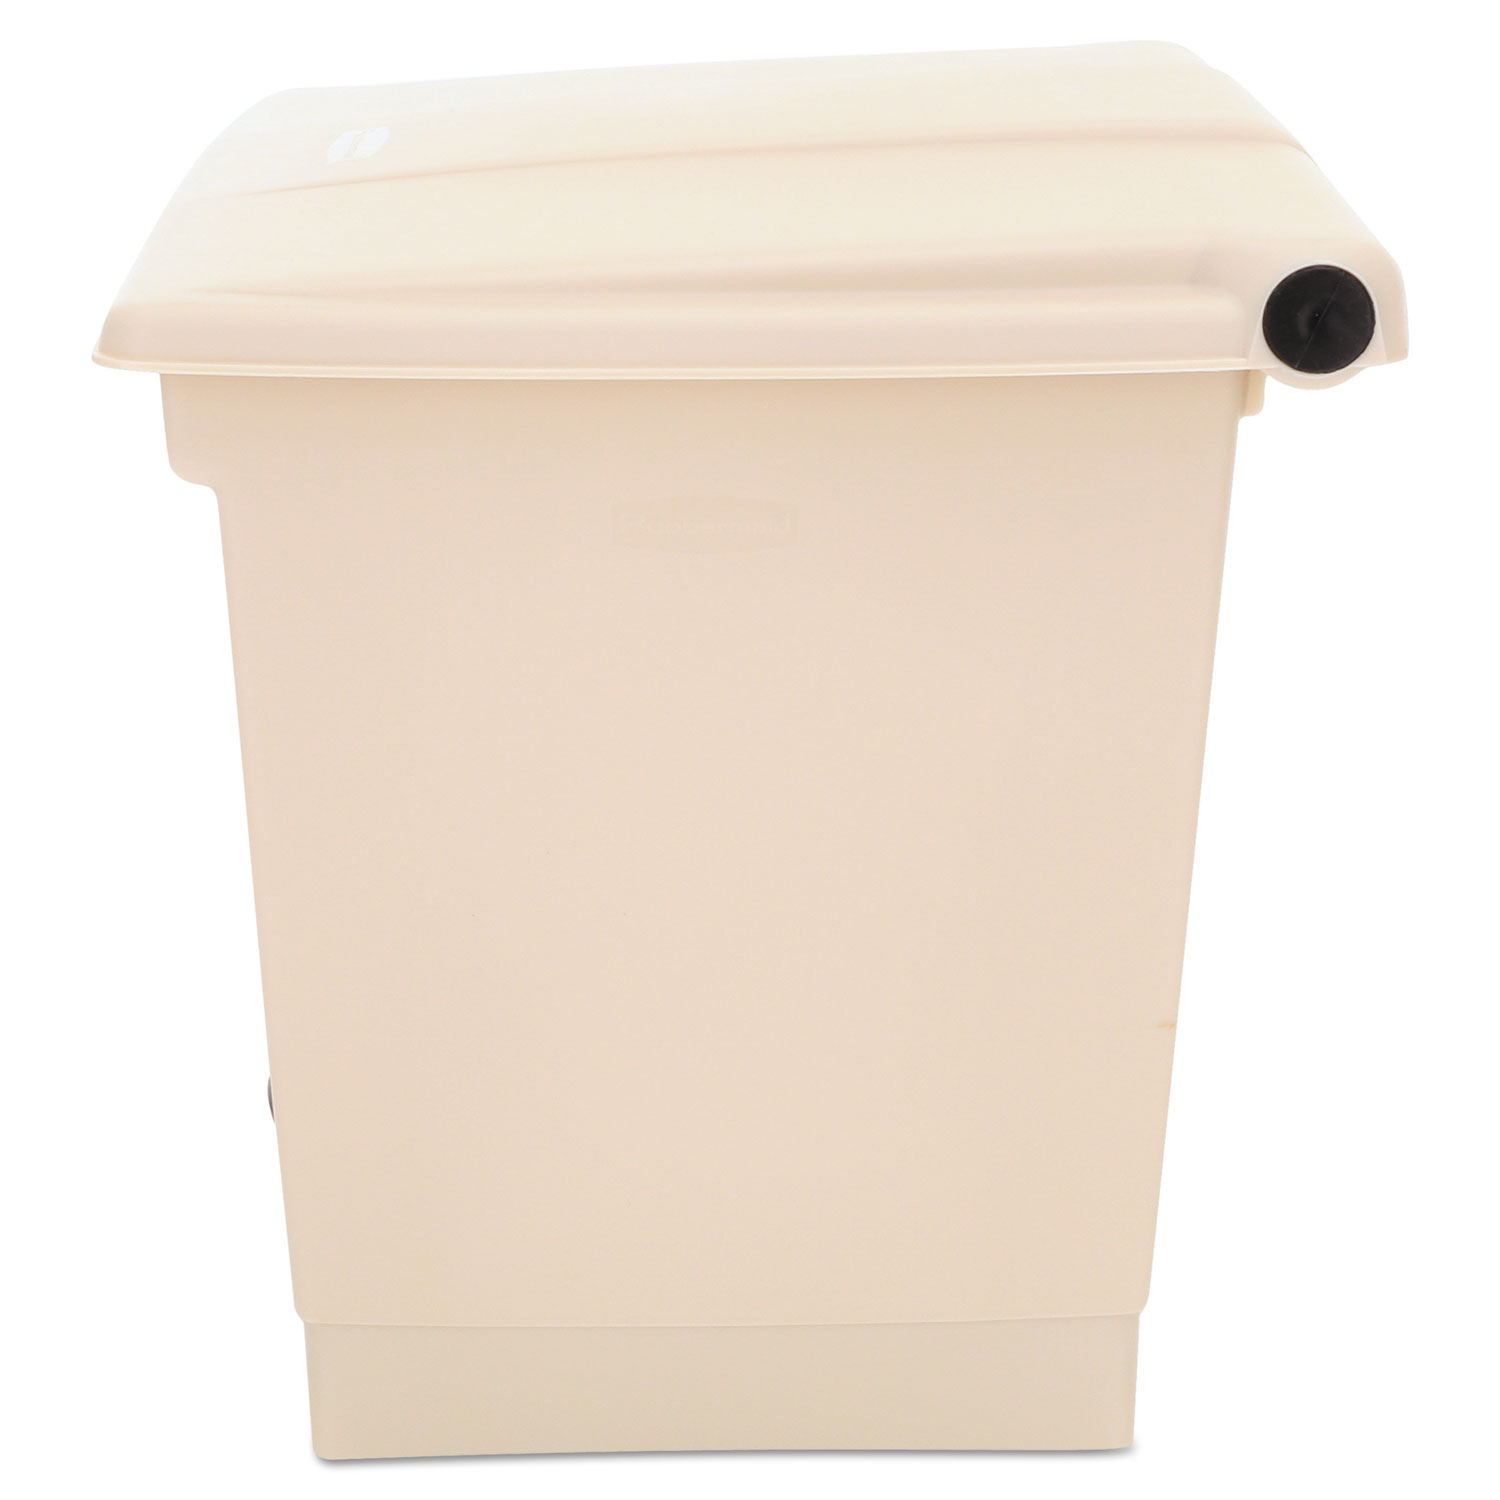 Indoor Utility Step-On Waste Container, Square, Plastic, 8gal, Beige